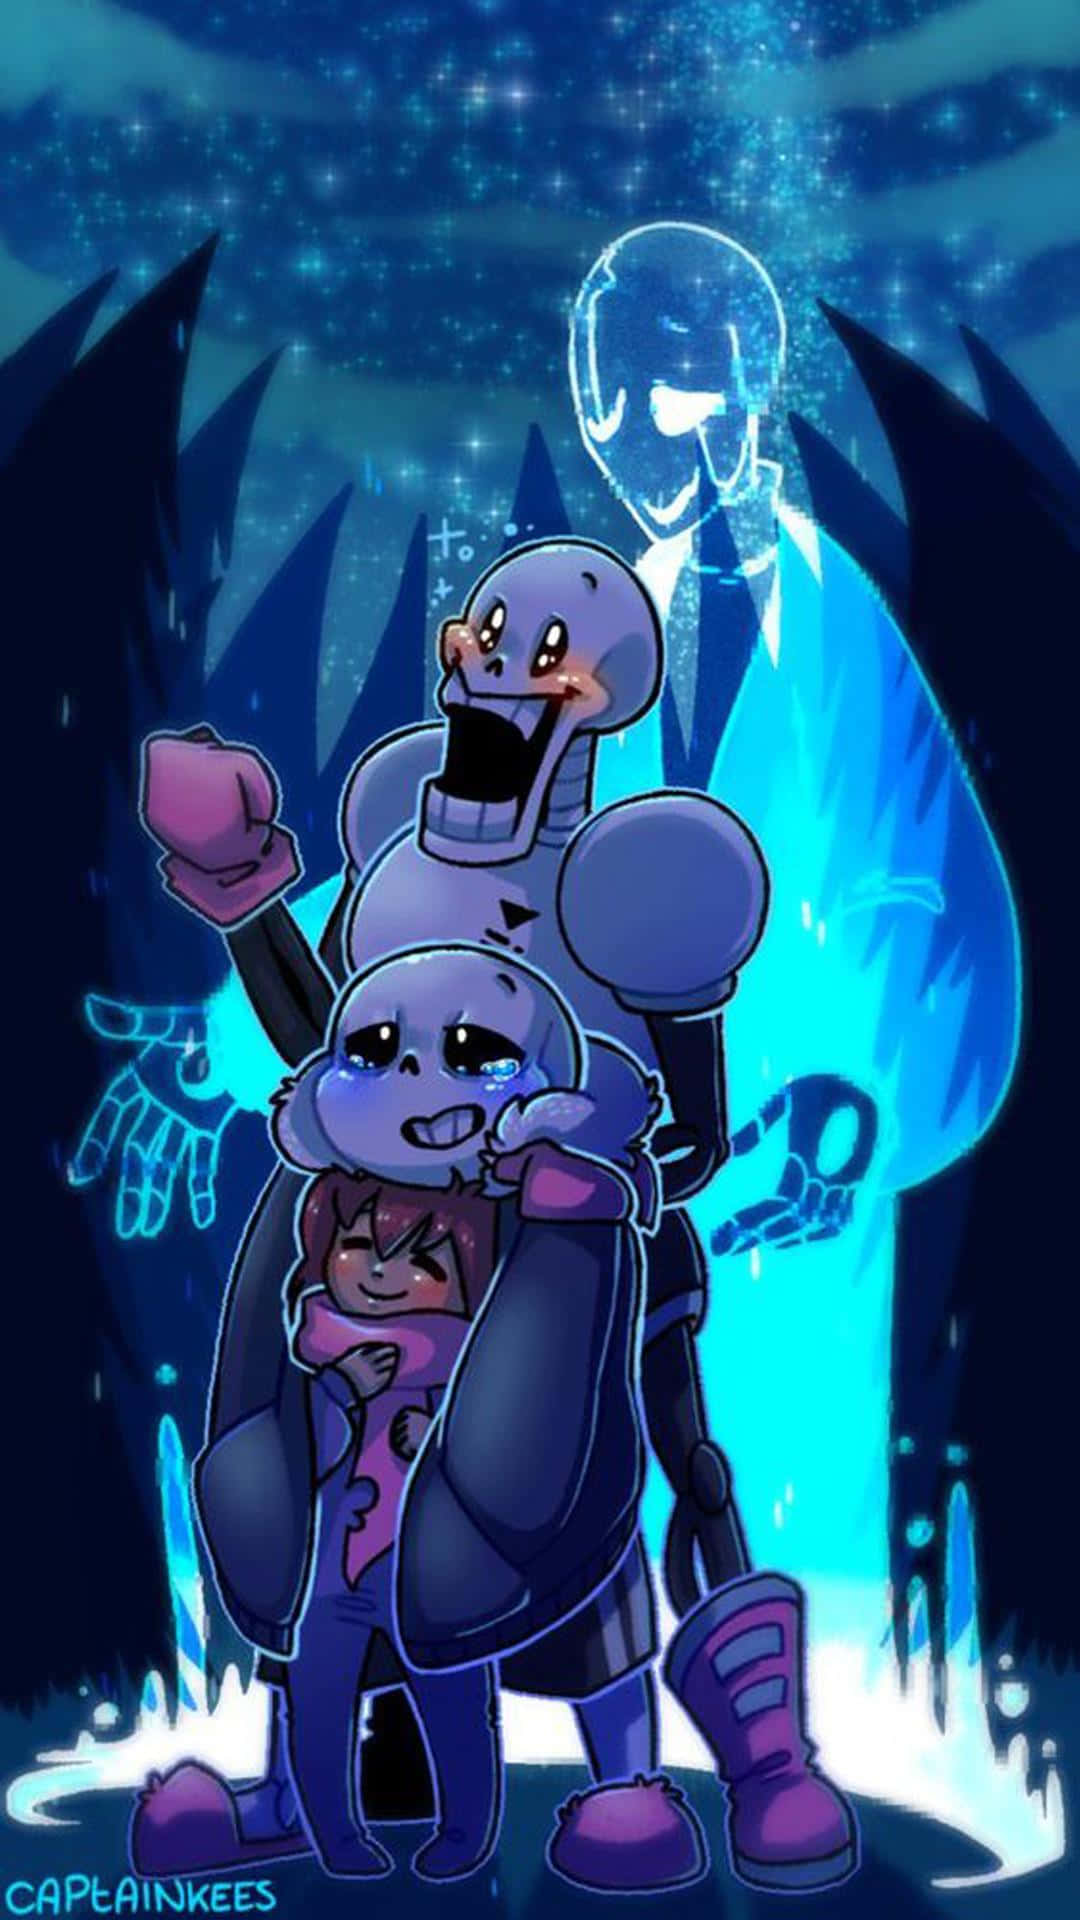 Welcome to the World of Undertale!